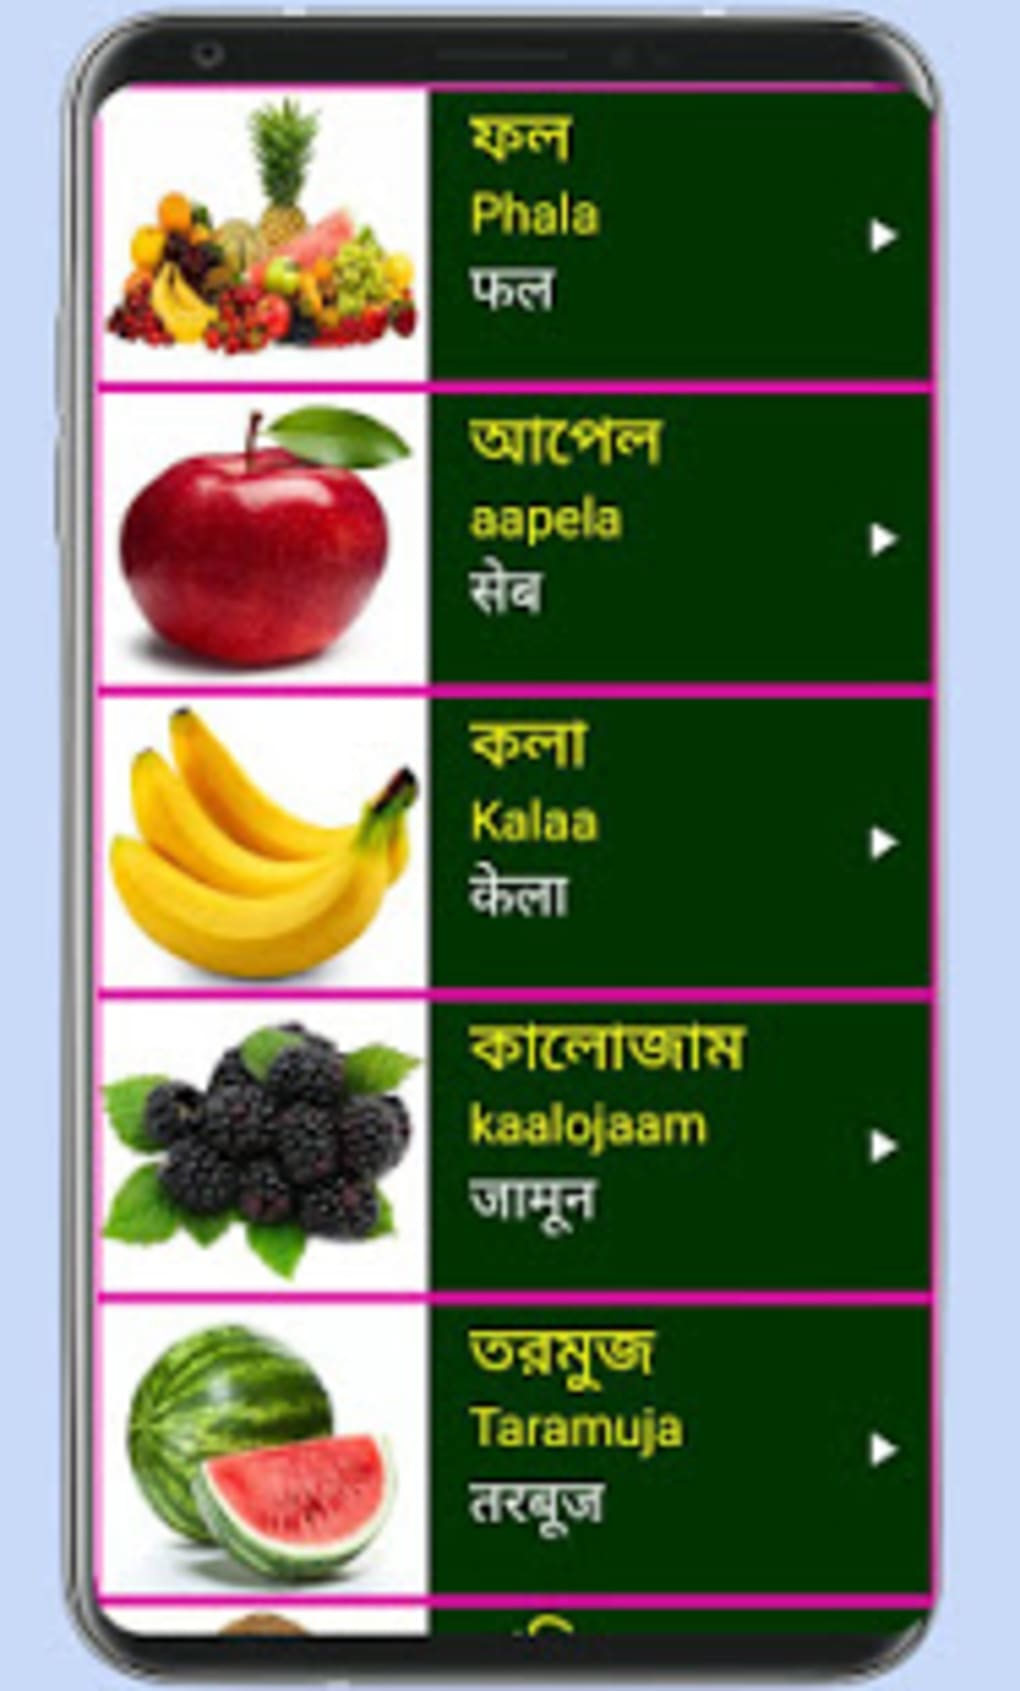 learn-bengali-from-hindi-apk-android